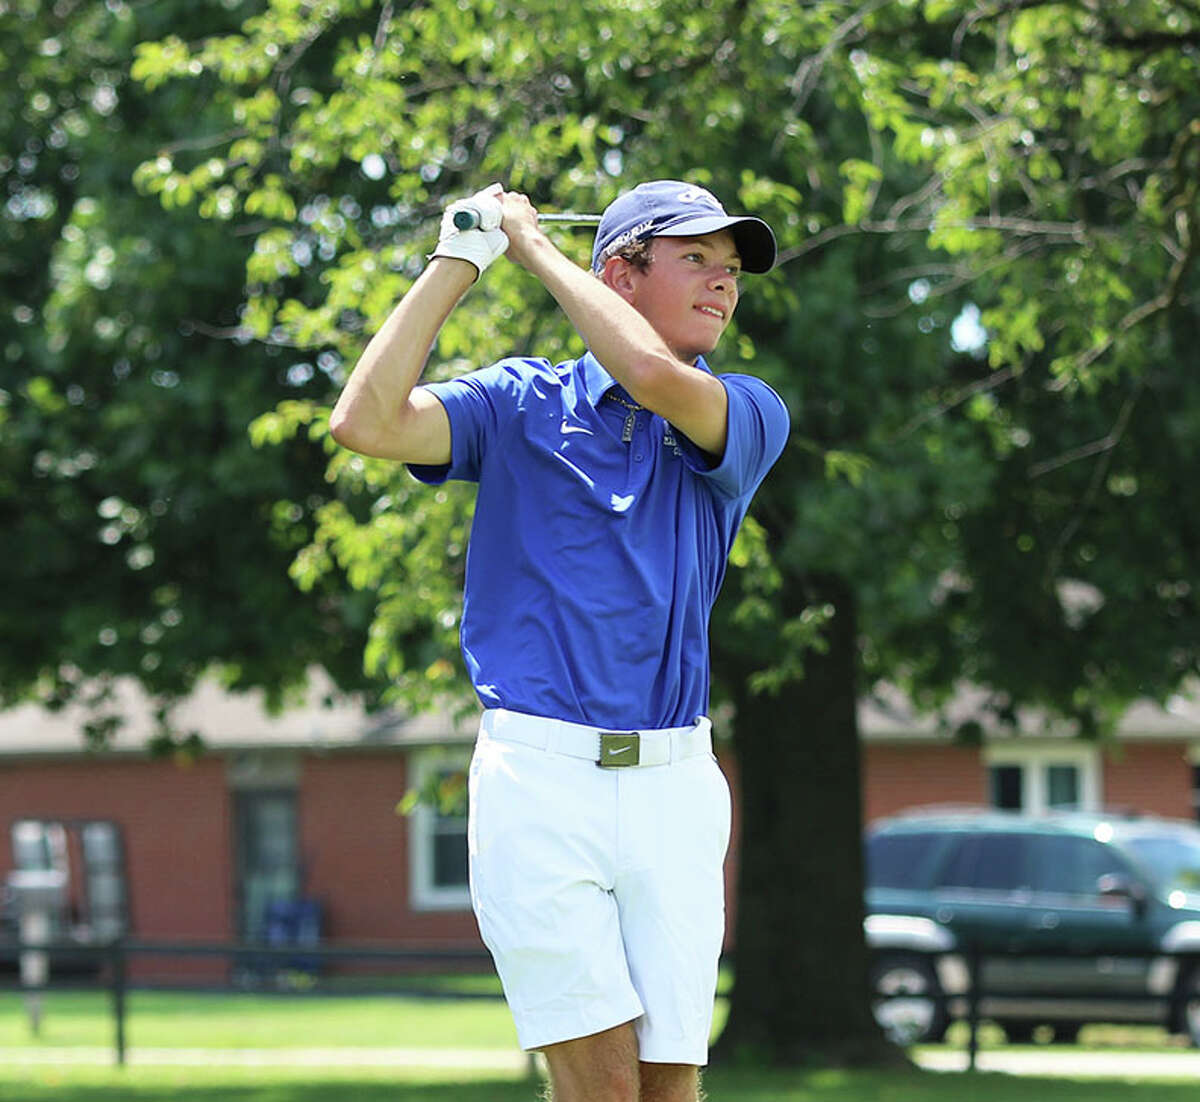 Marquette Catholic's Will Schwartz watches his shot earlier this season in the Madison County Tourney at Belk Park in Wood River. On Friday, Schwartz shot 79 at Belk to finish second in the inaugural Gateway Metro Conference Tournament.